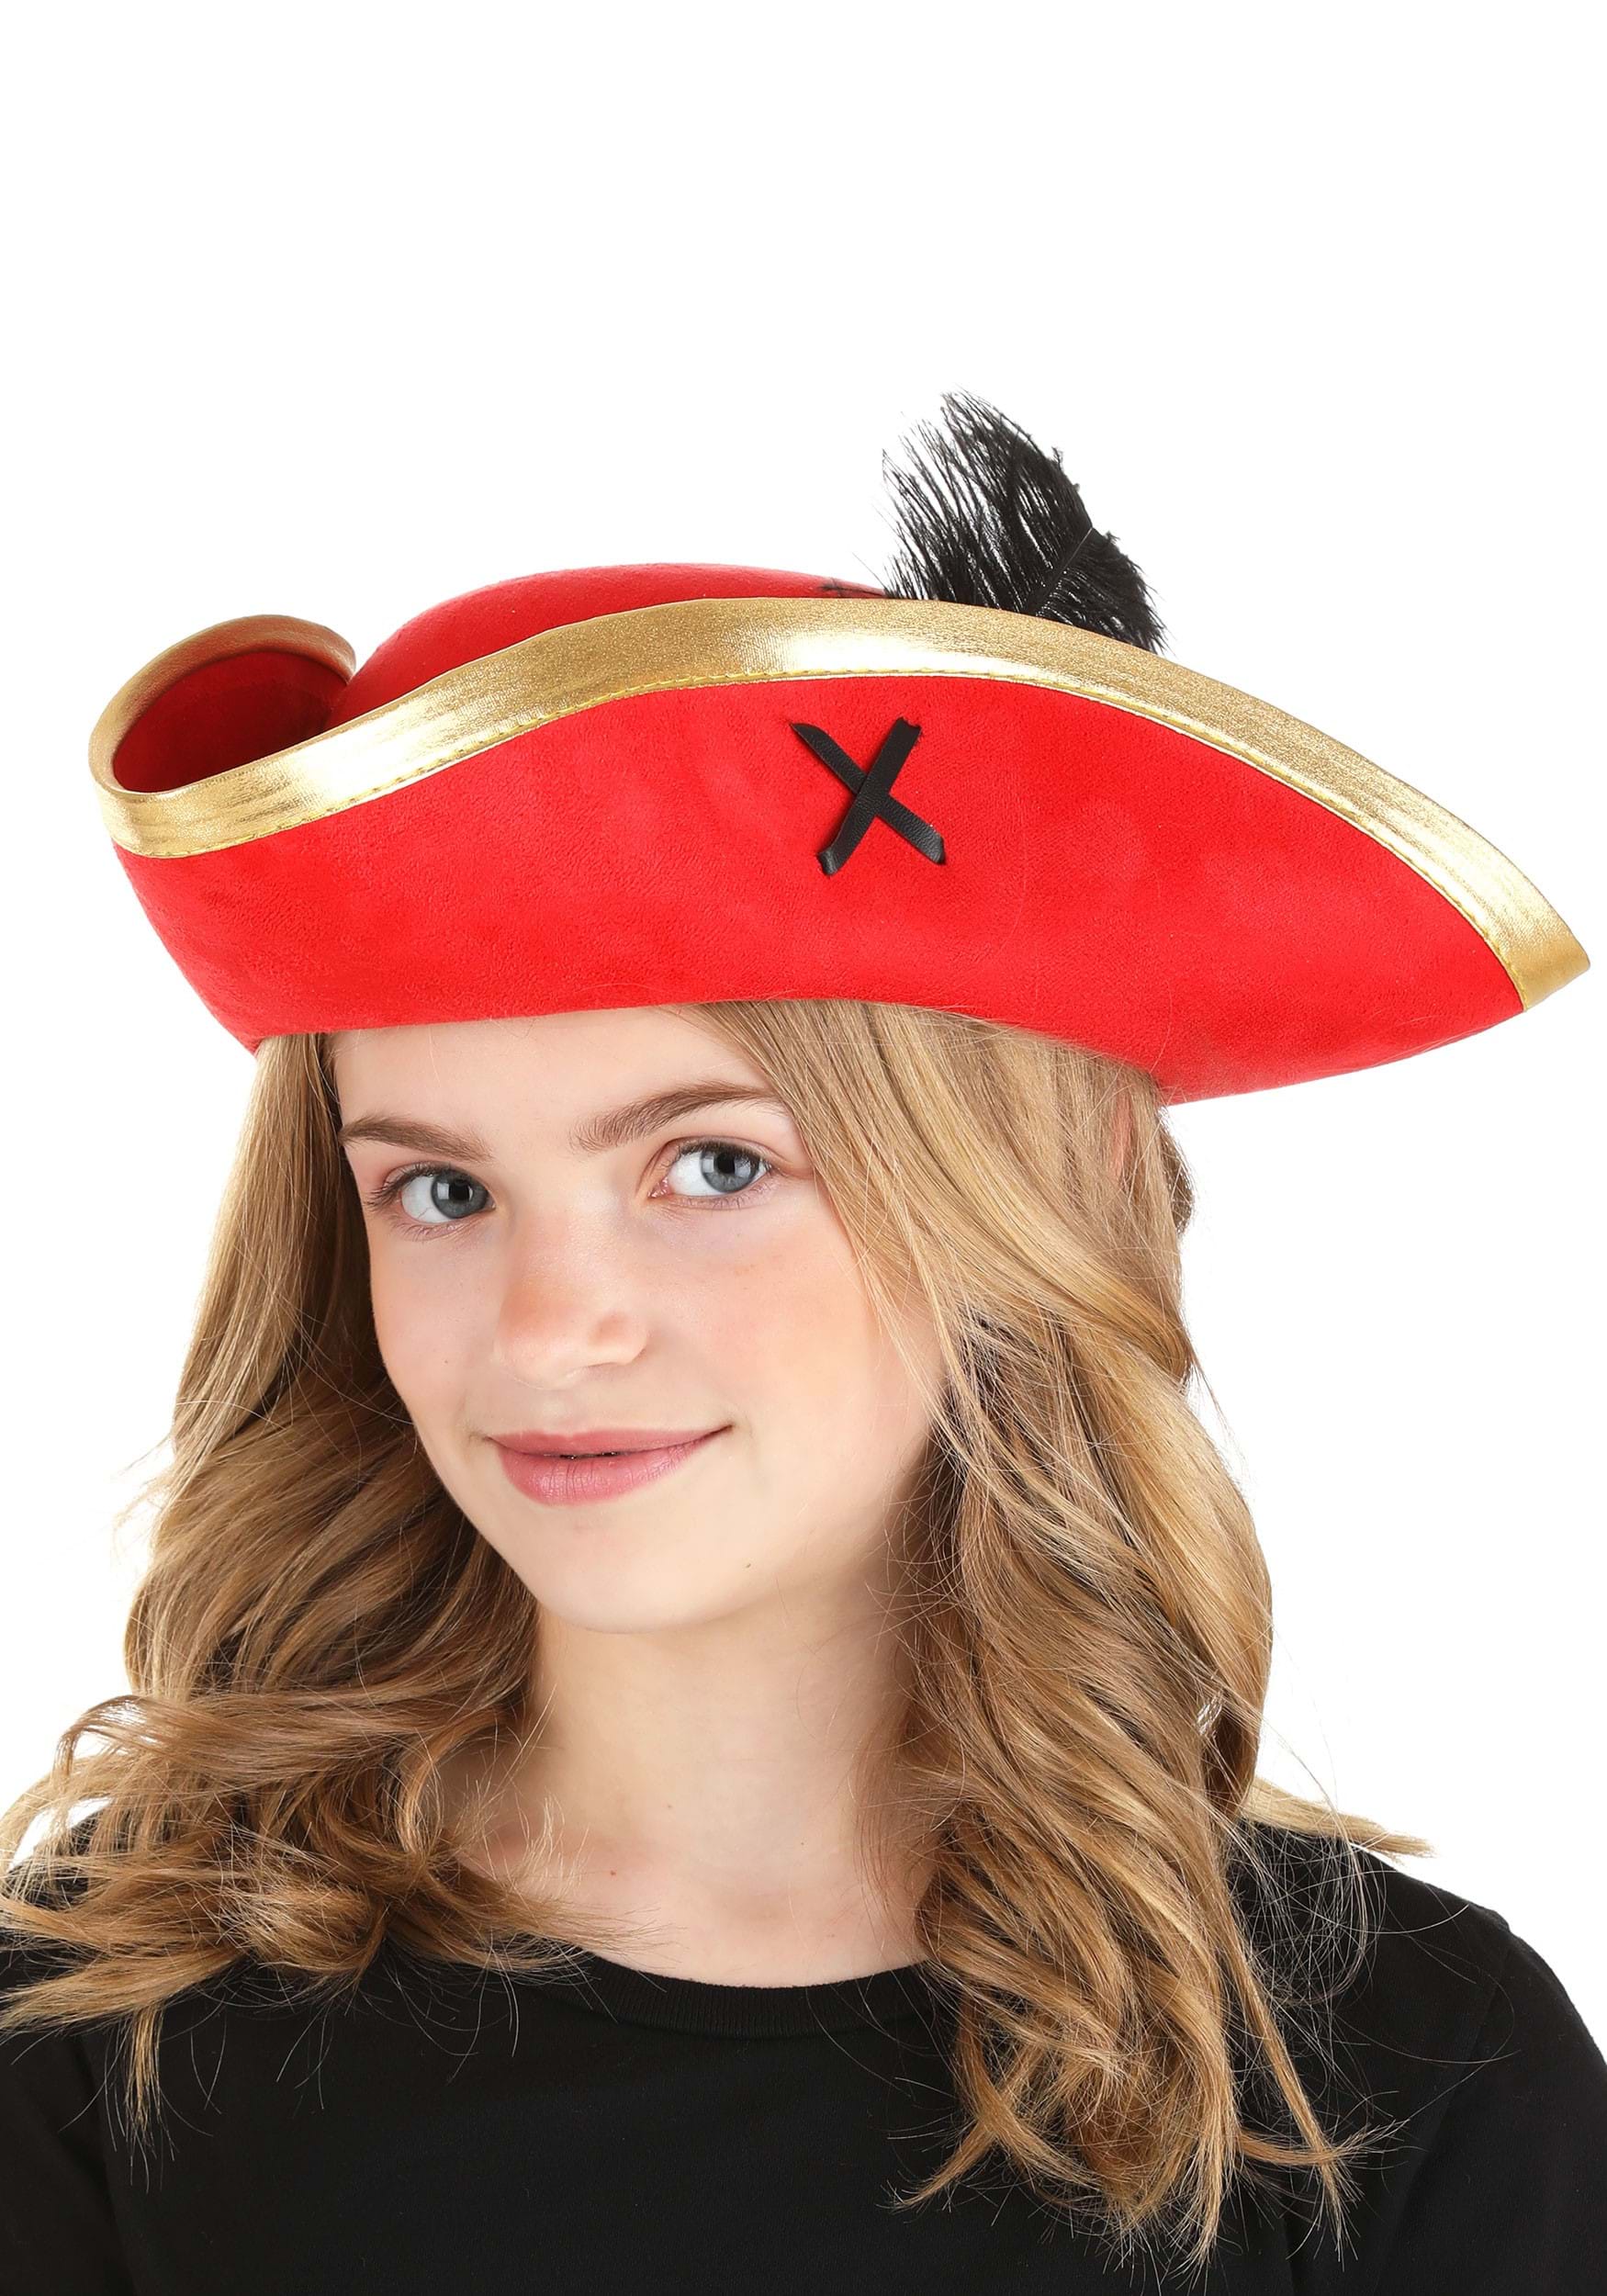 Red Skull and Crossbones Pirate Costume Hat